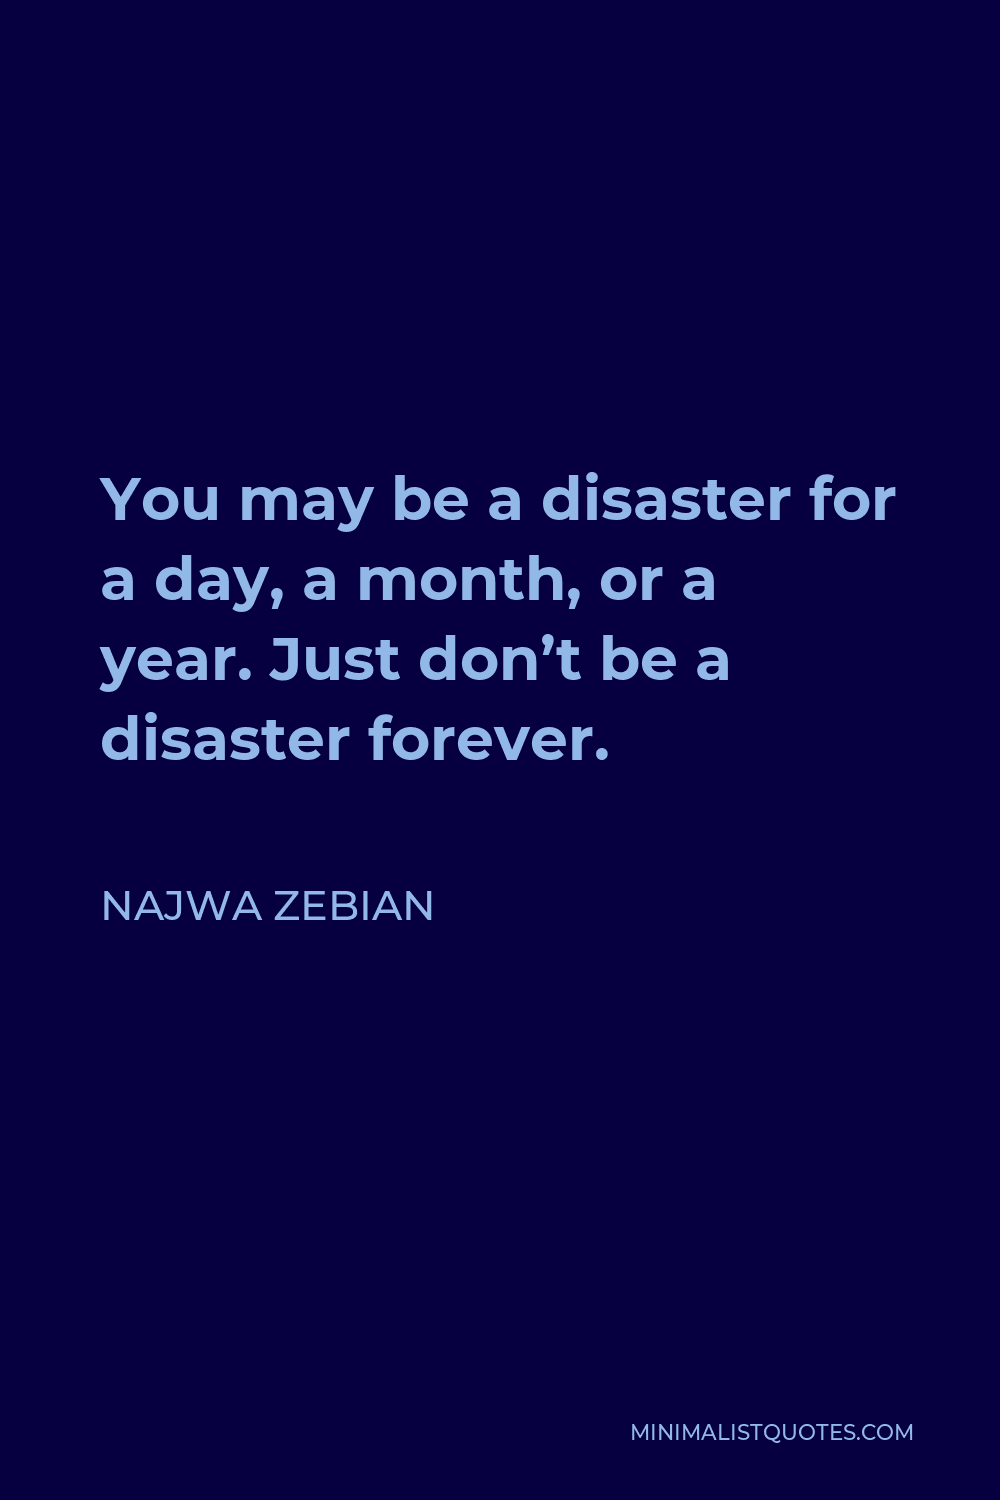 Najwa Zebian Quote - You may be a disaster for a day, a month, or a year. Just don’t be a disaster forever.